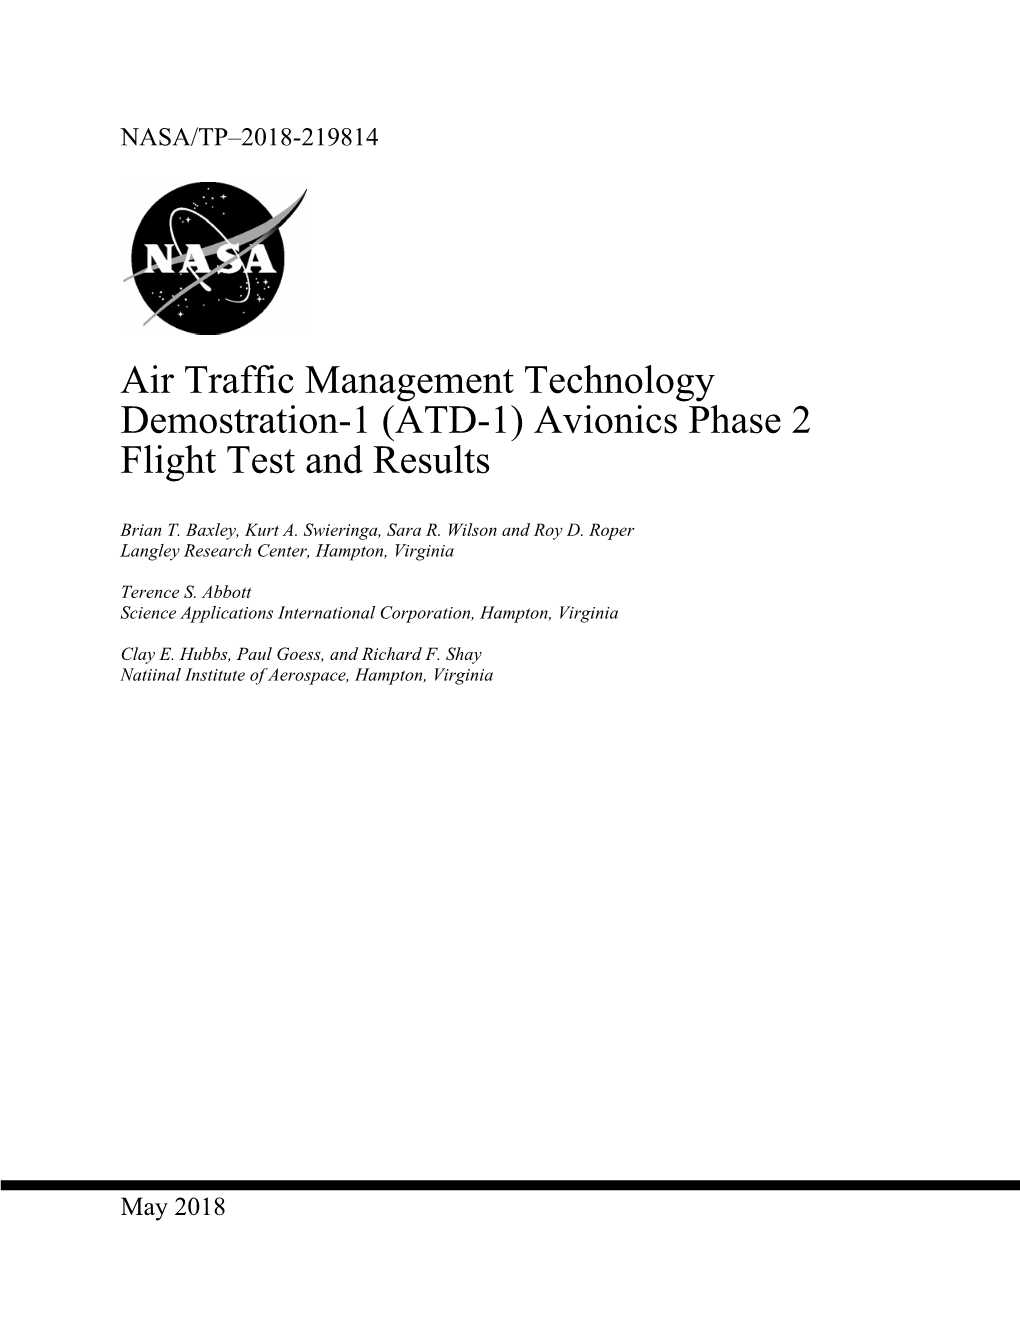 (ATD-1) Avionics Phase 2 Flight Test and Results